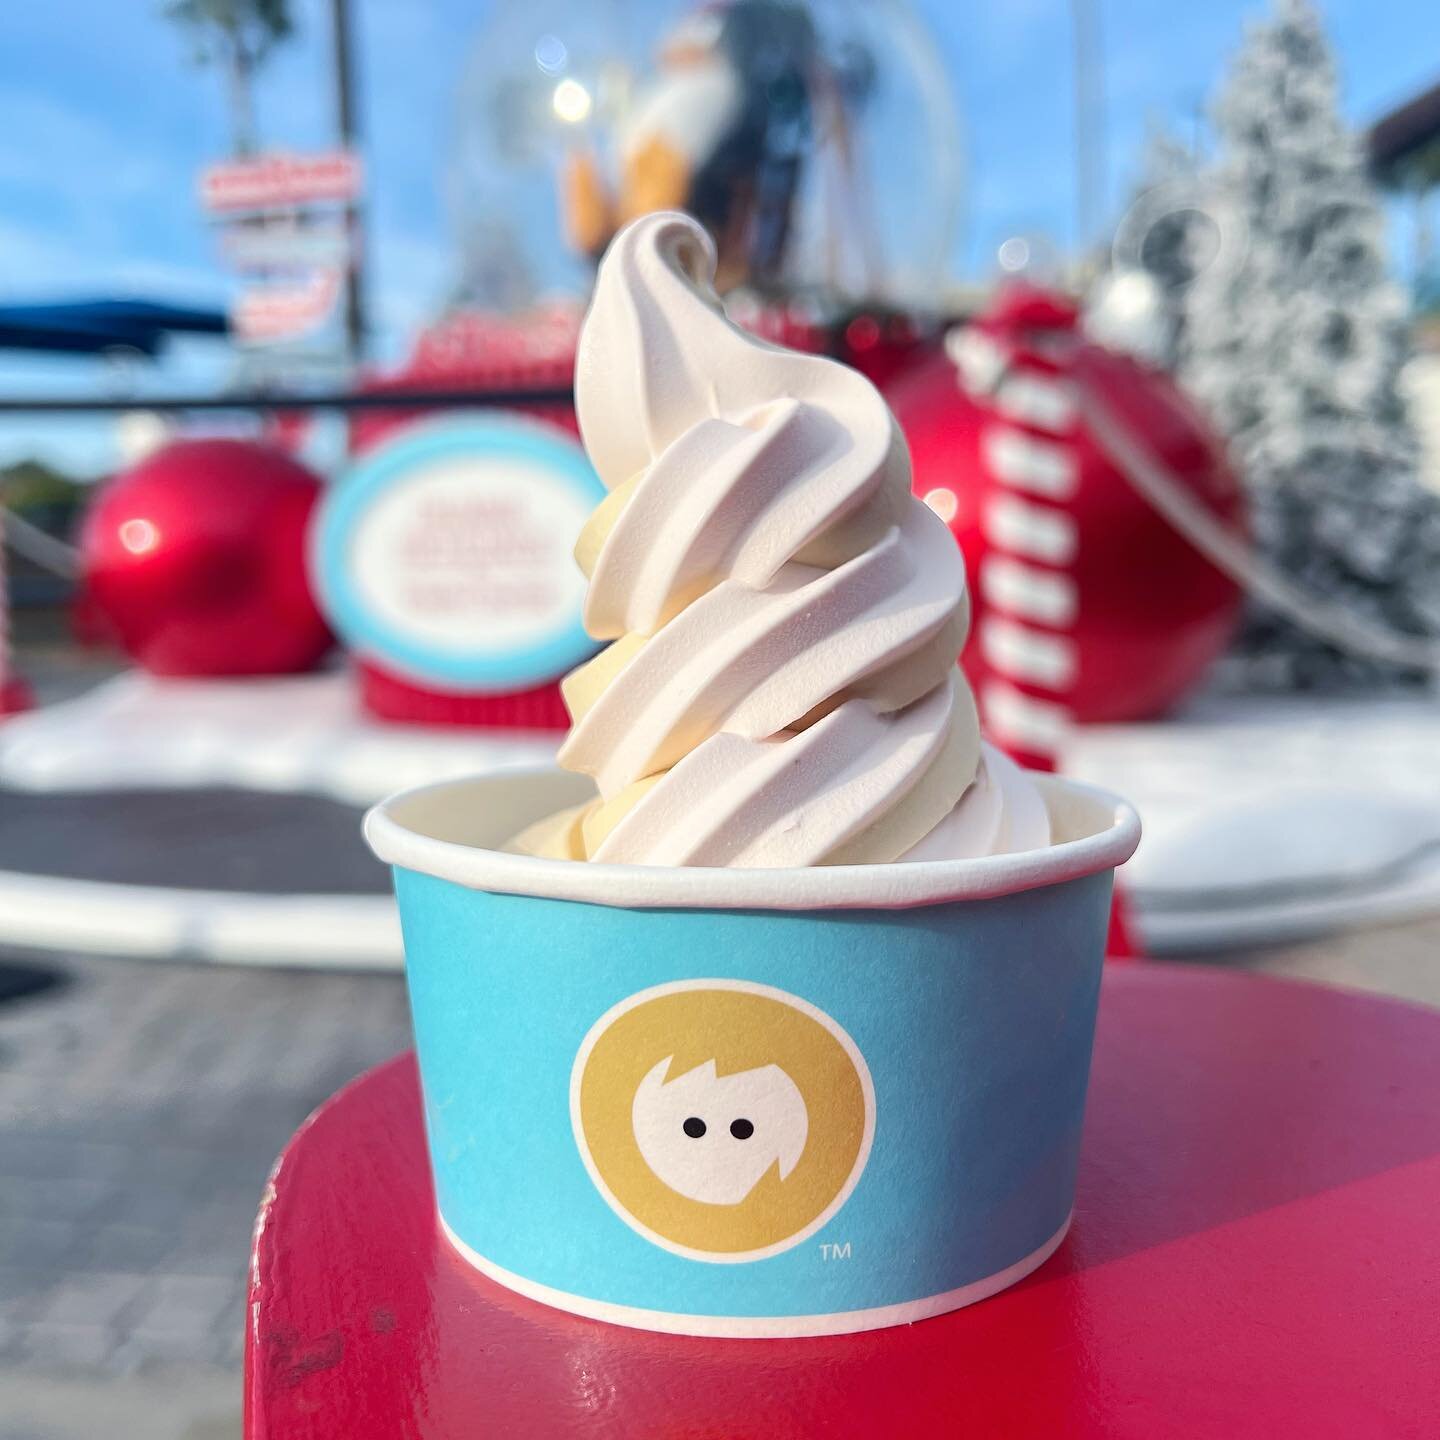 Happy holidays ❄️⛄️! We&rsquo;re now swirling strawberry cheesecake and salted caramel soft serve at Iceskimo Del Mar. Be sure check our new toppings as well!